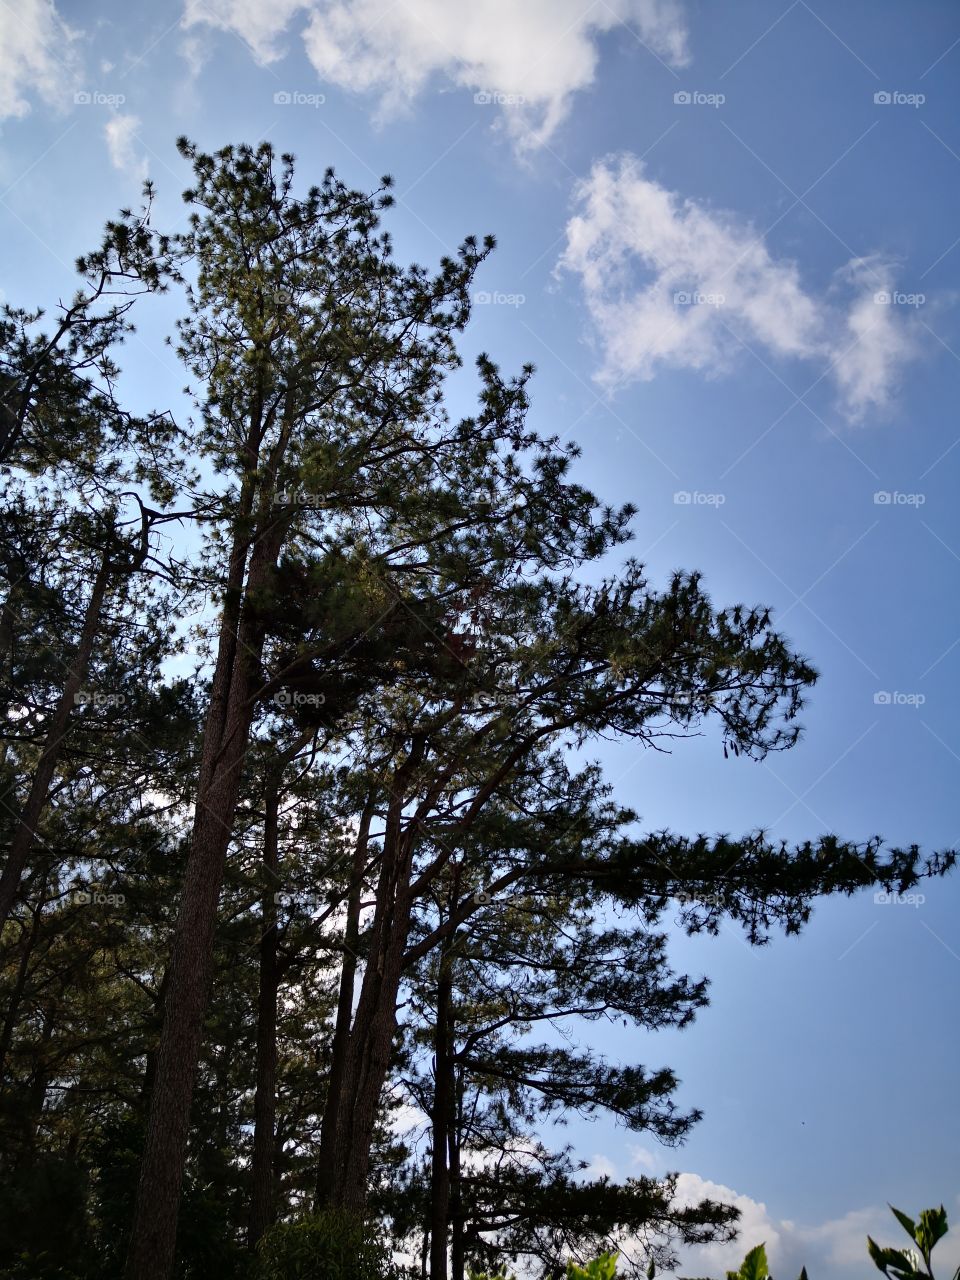 pine trees and blue skies